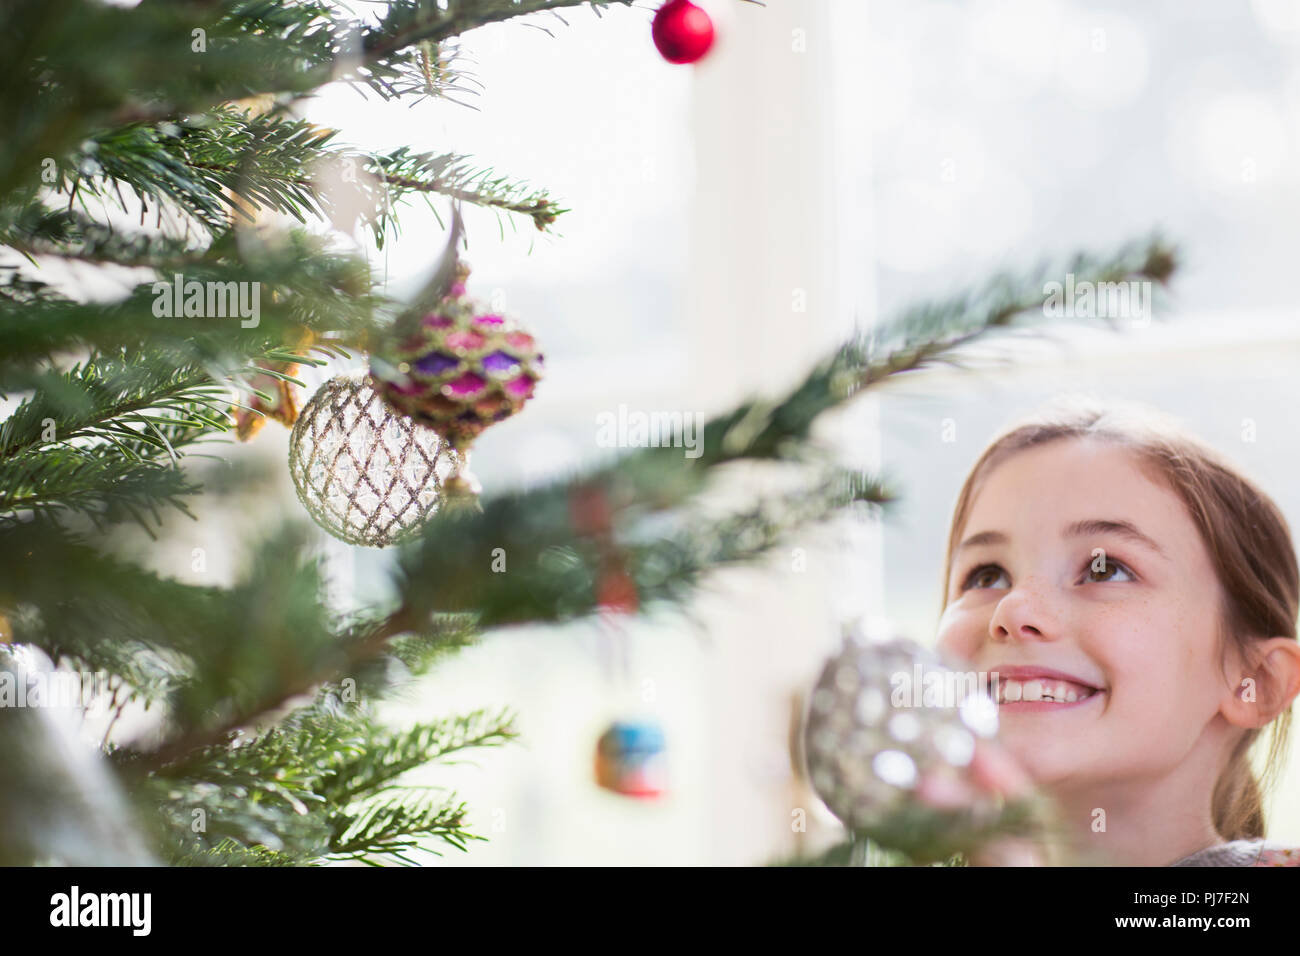 Smiling girl looking up at ornaments on Christmas Tree Banque D'Images